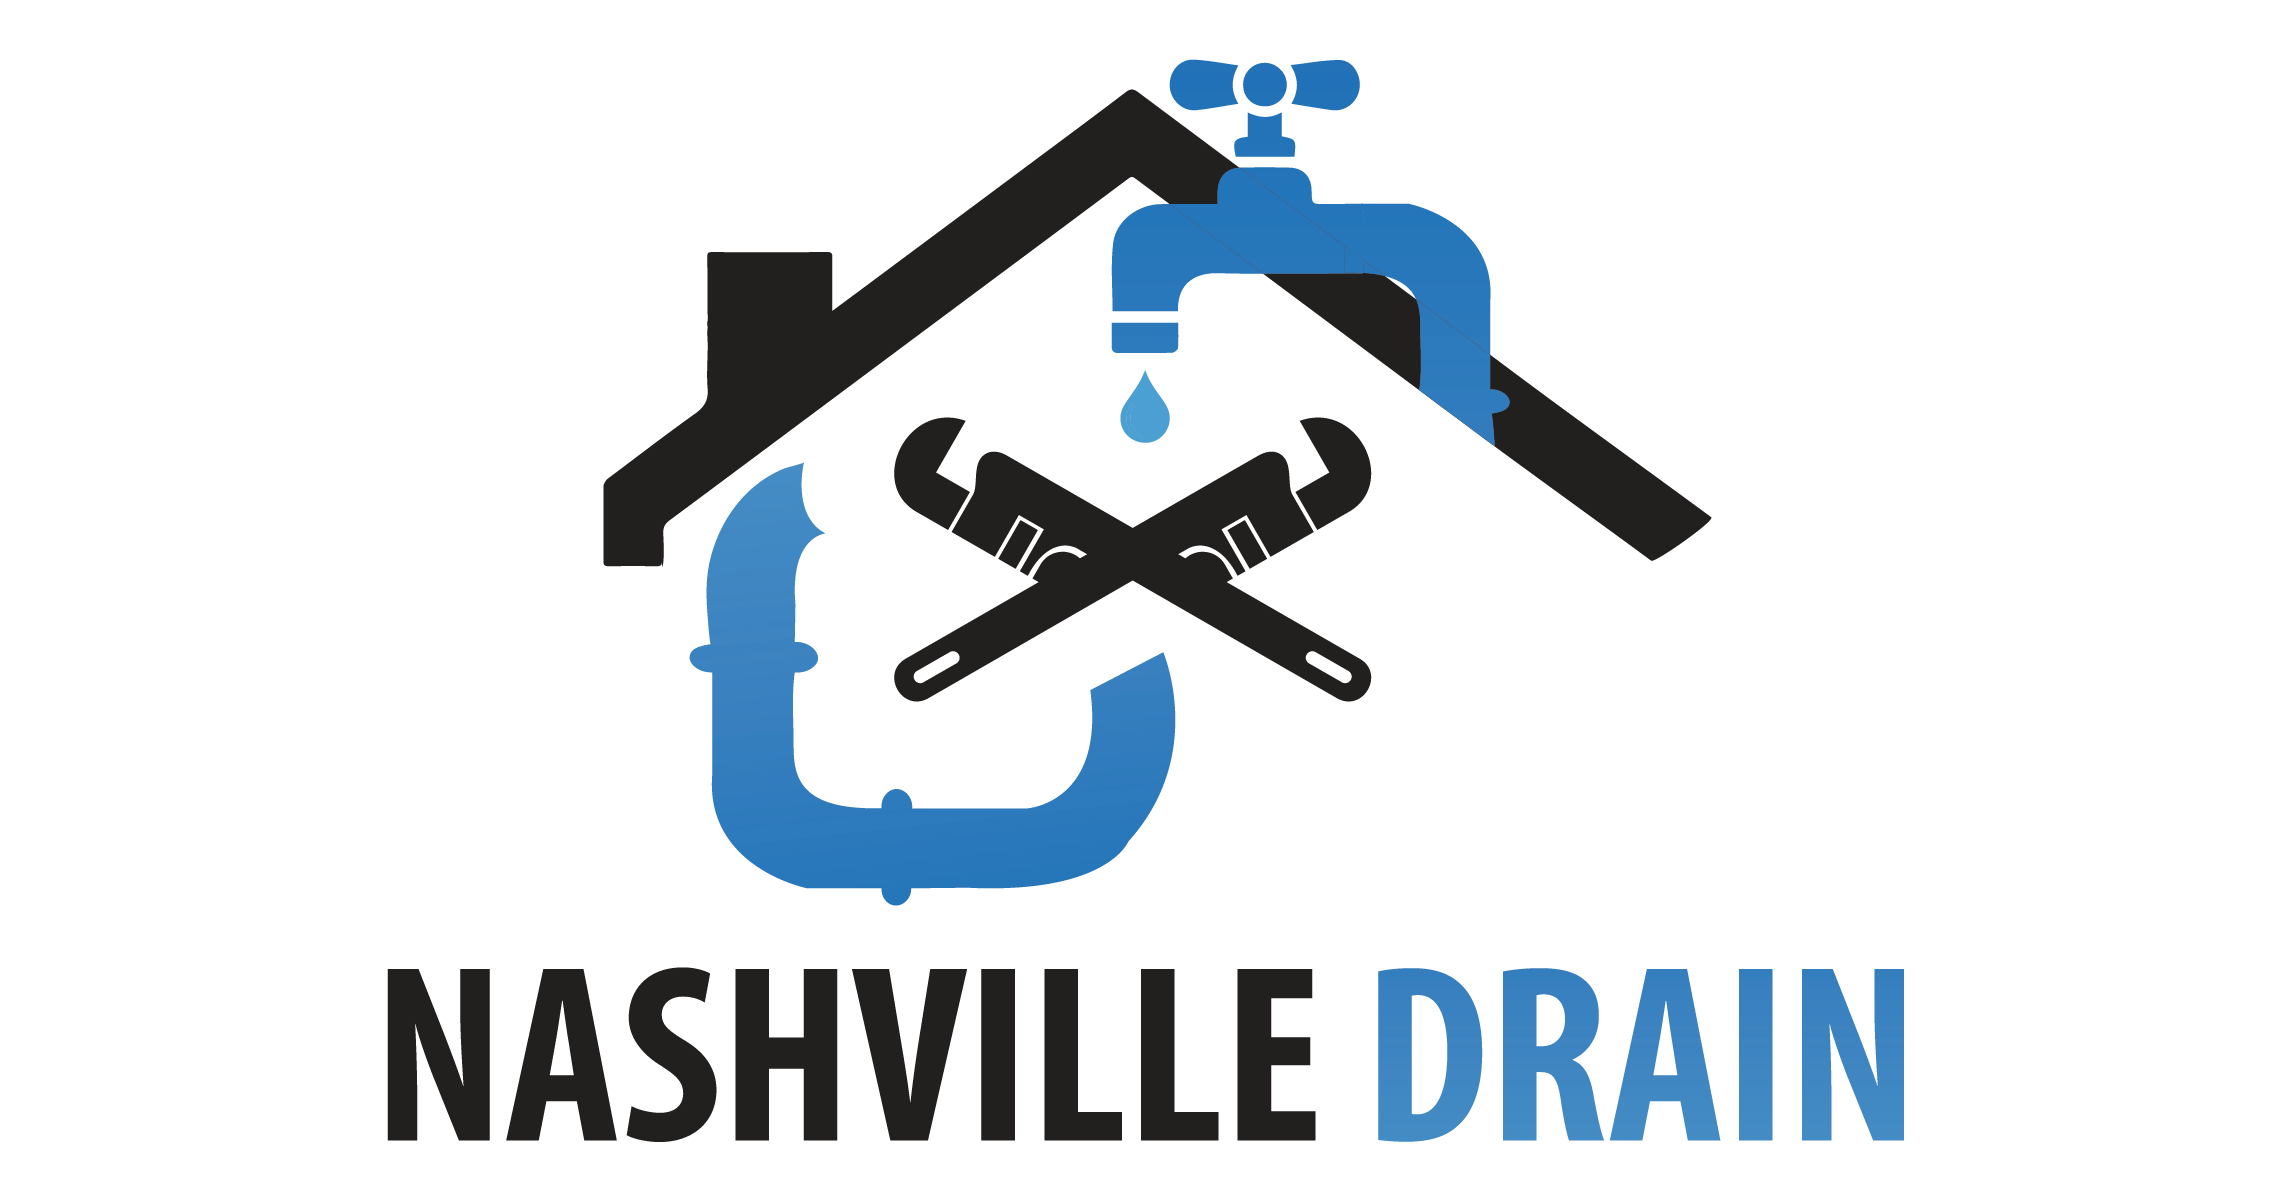 Nashville Drain Waterproofing & Drainage Solutions Tennessee